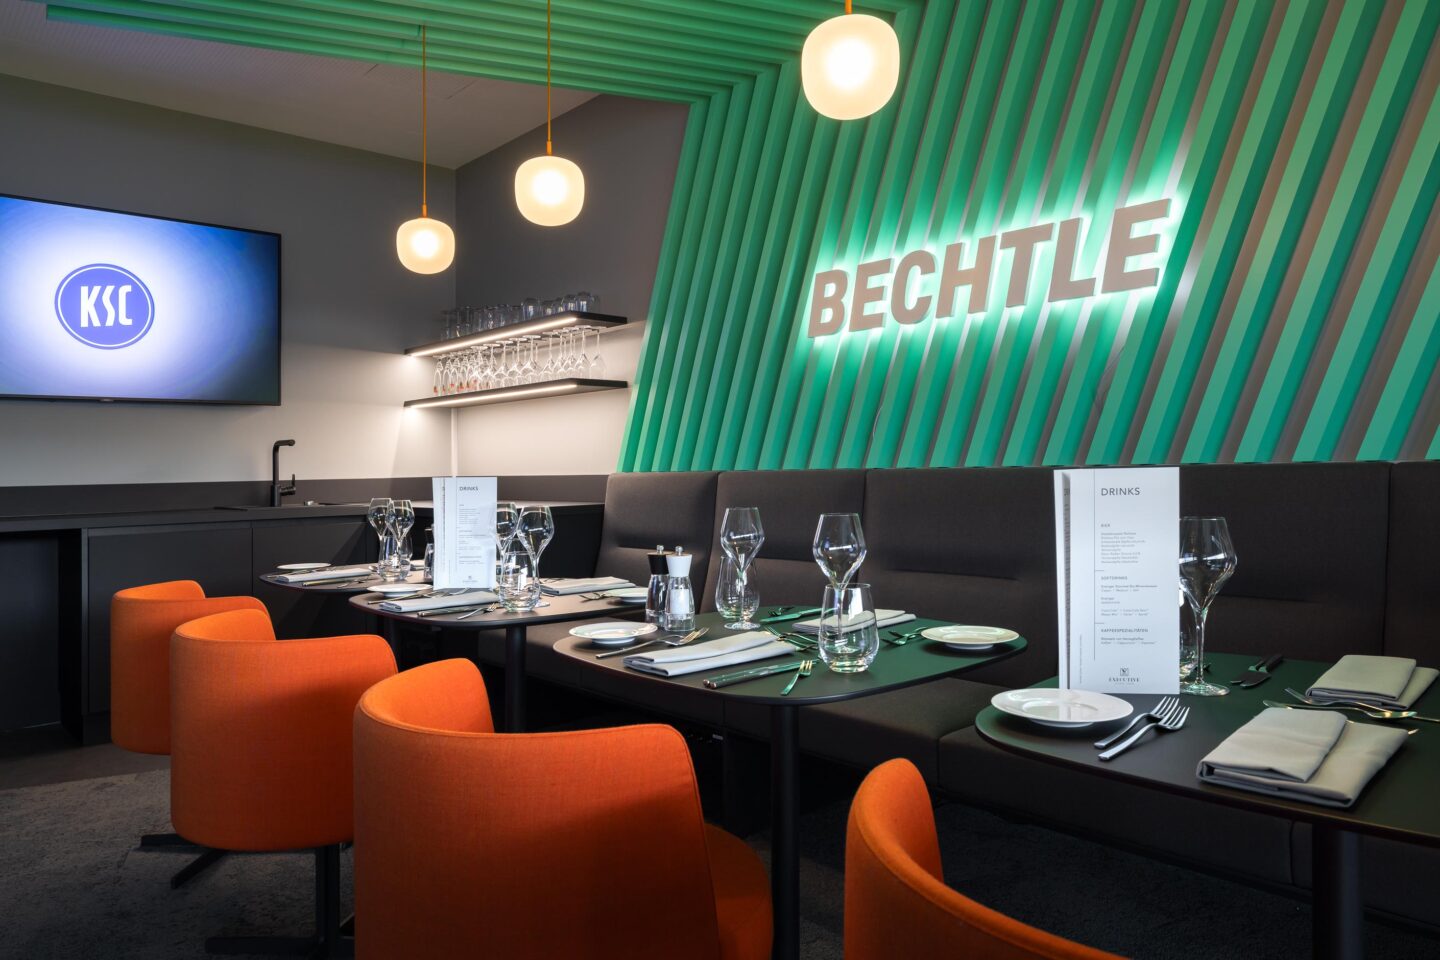 Bechtle Executive Box at BBBank Wildpark | logo of the brand